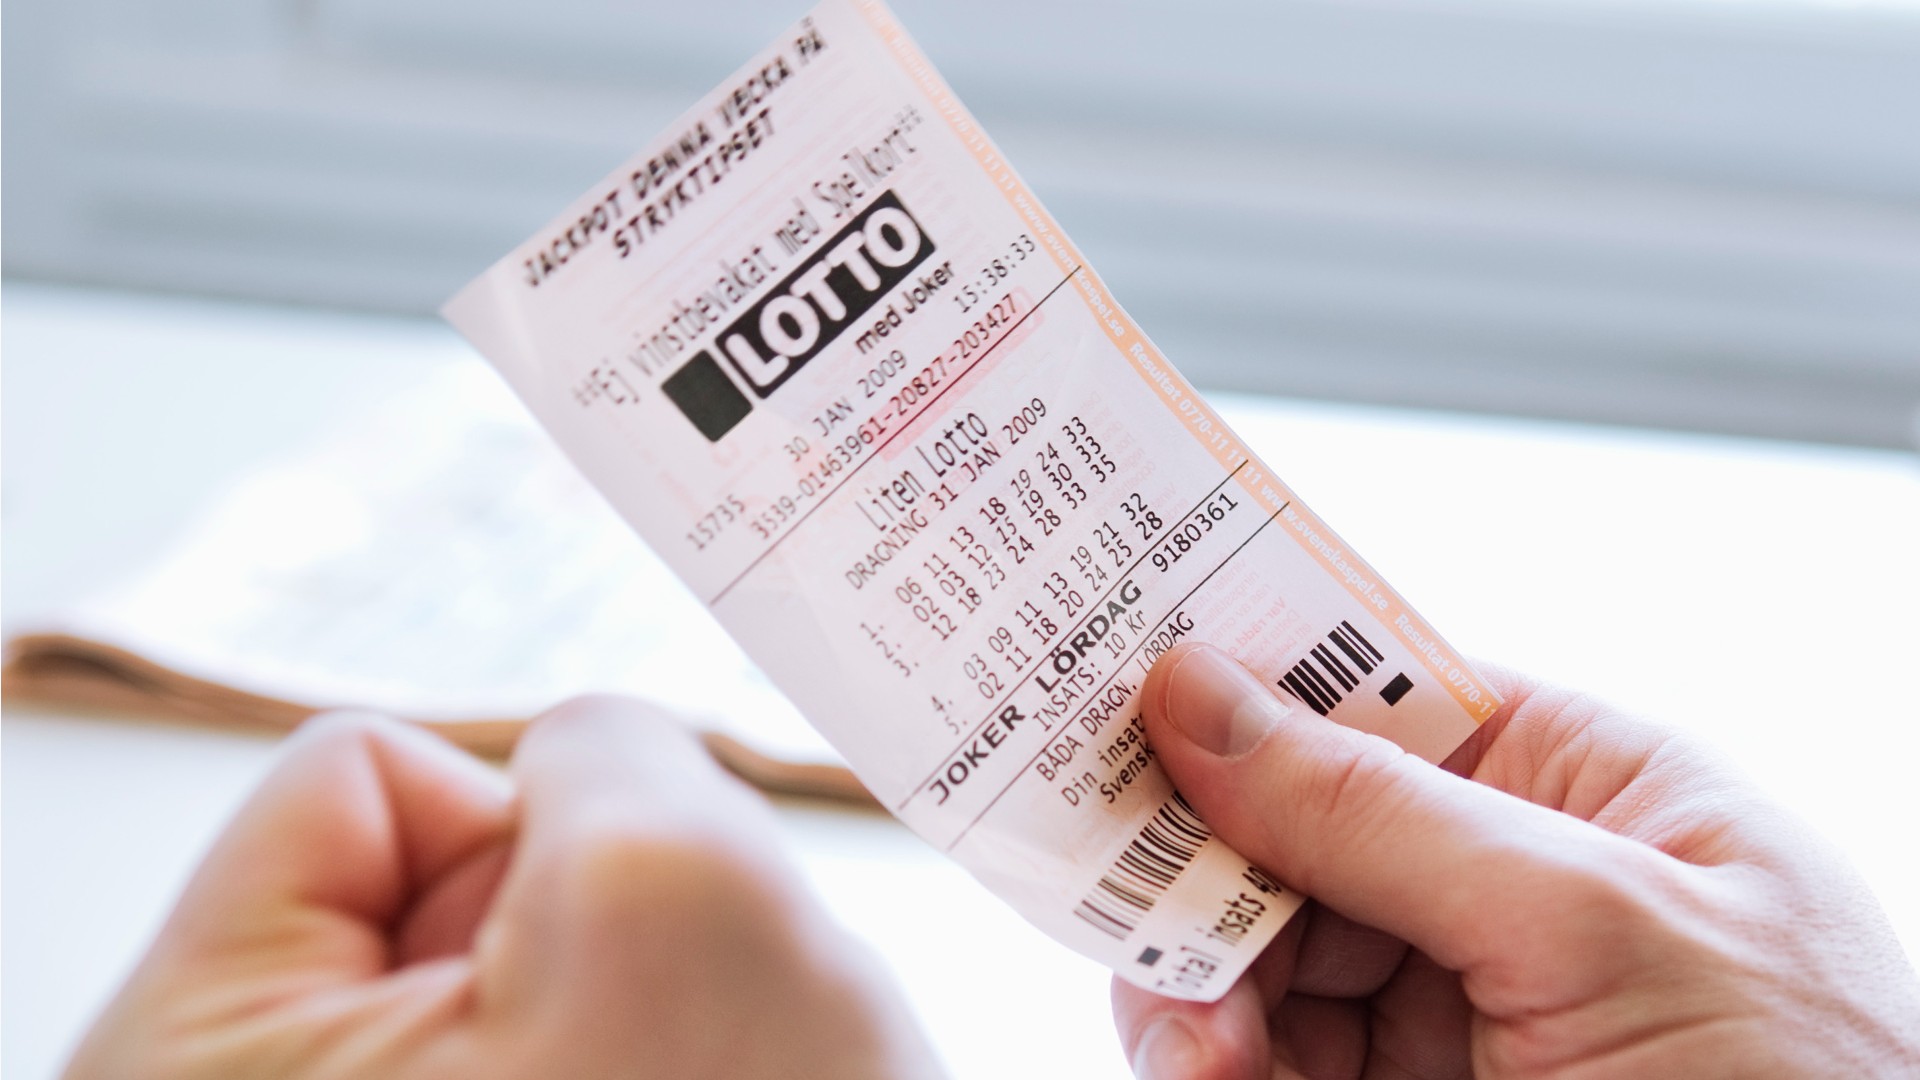 Washington DC Man Sues Powerball After Claiming They Made A Mistake When They Announced His $360M Winning Numbers